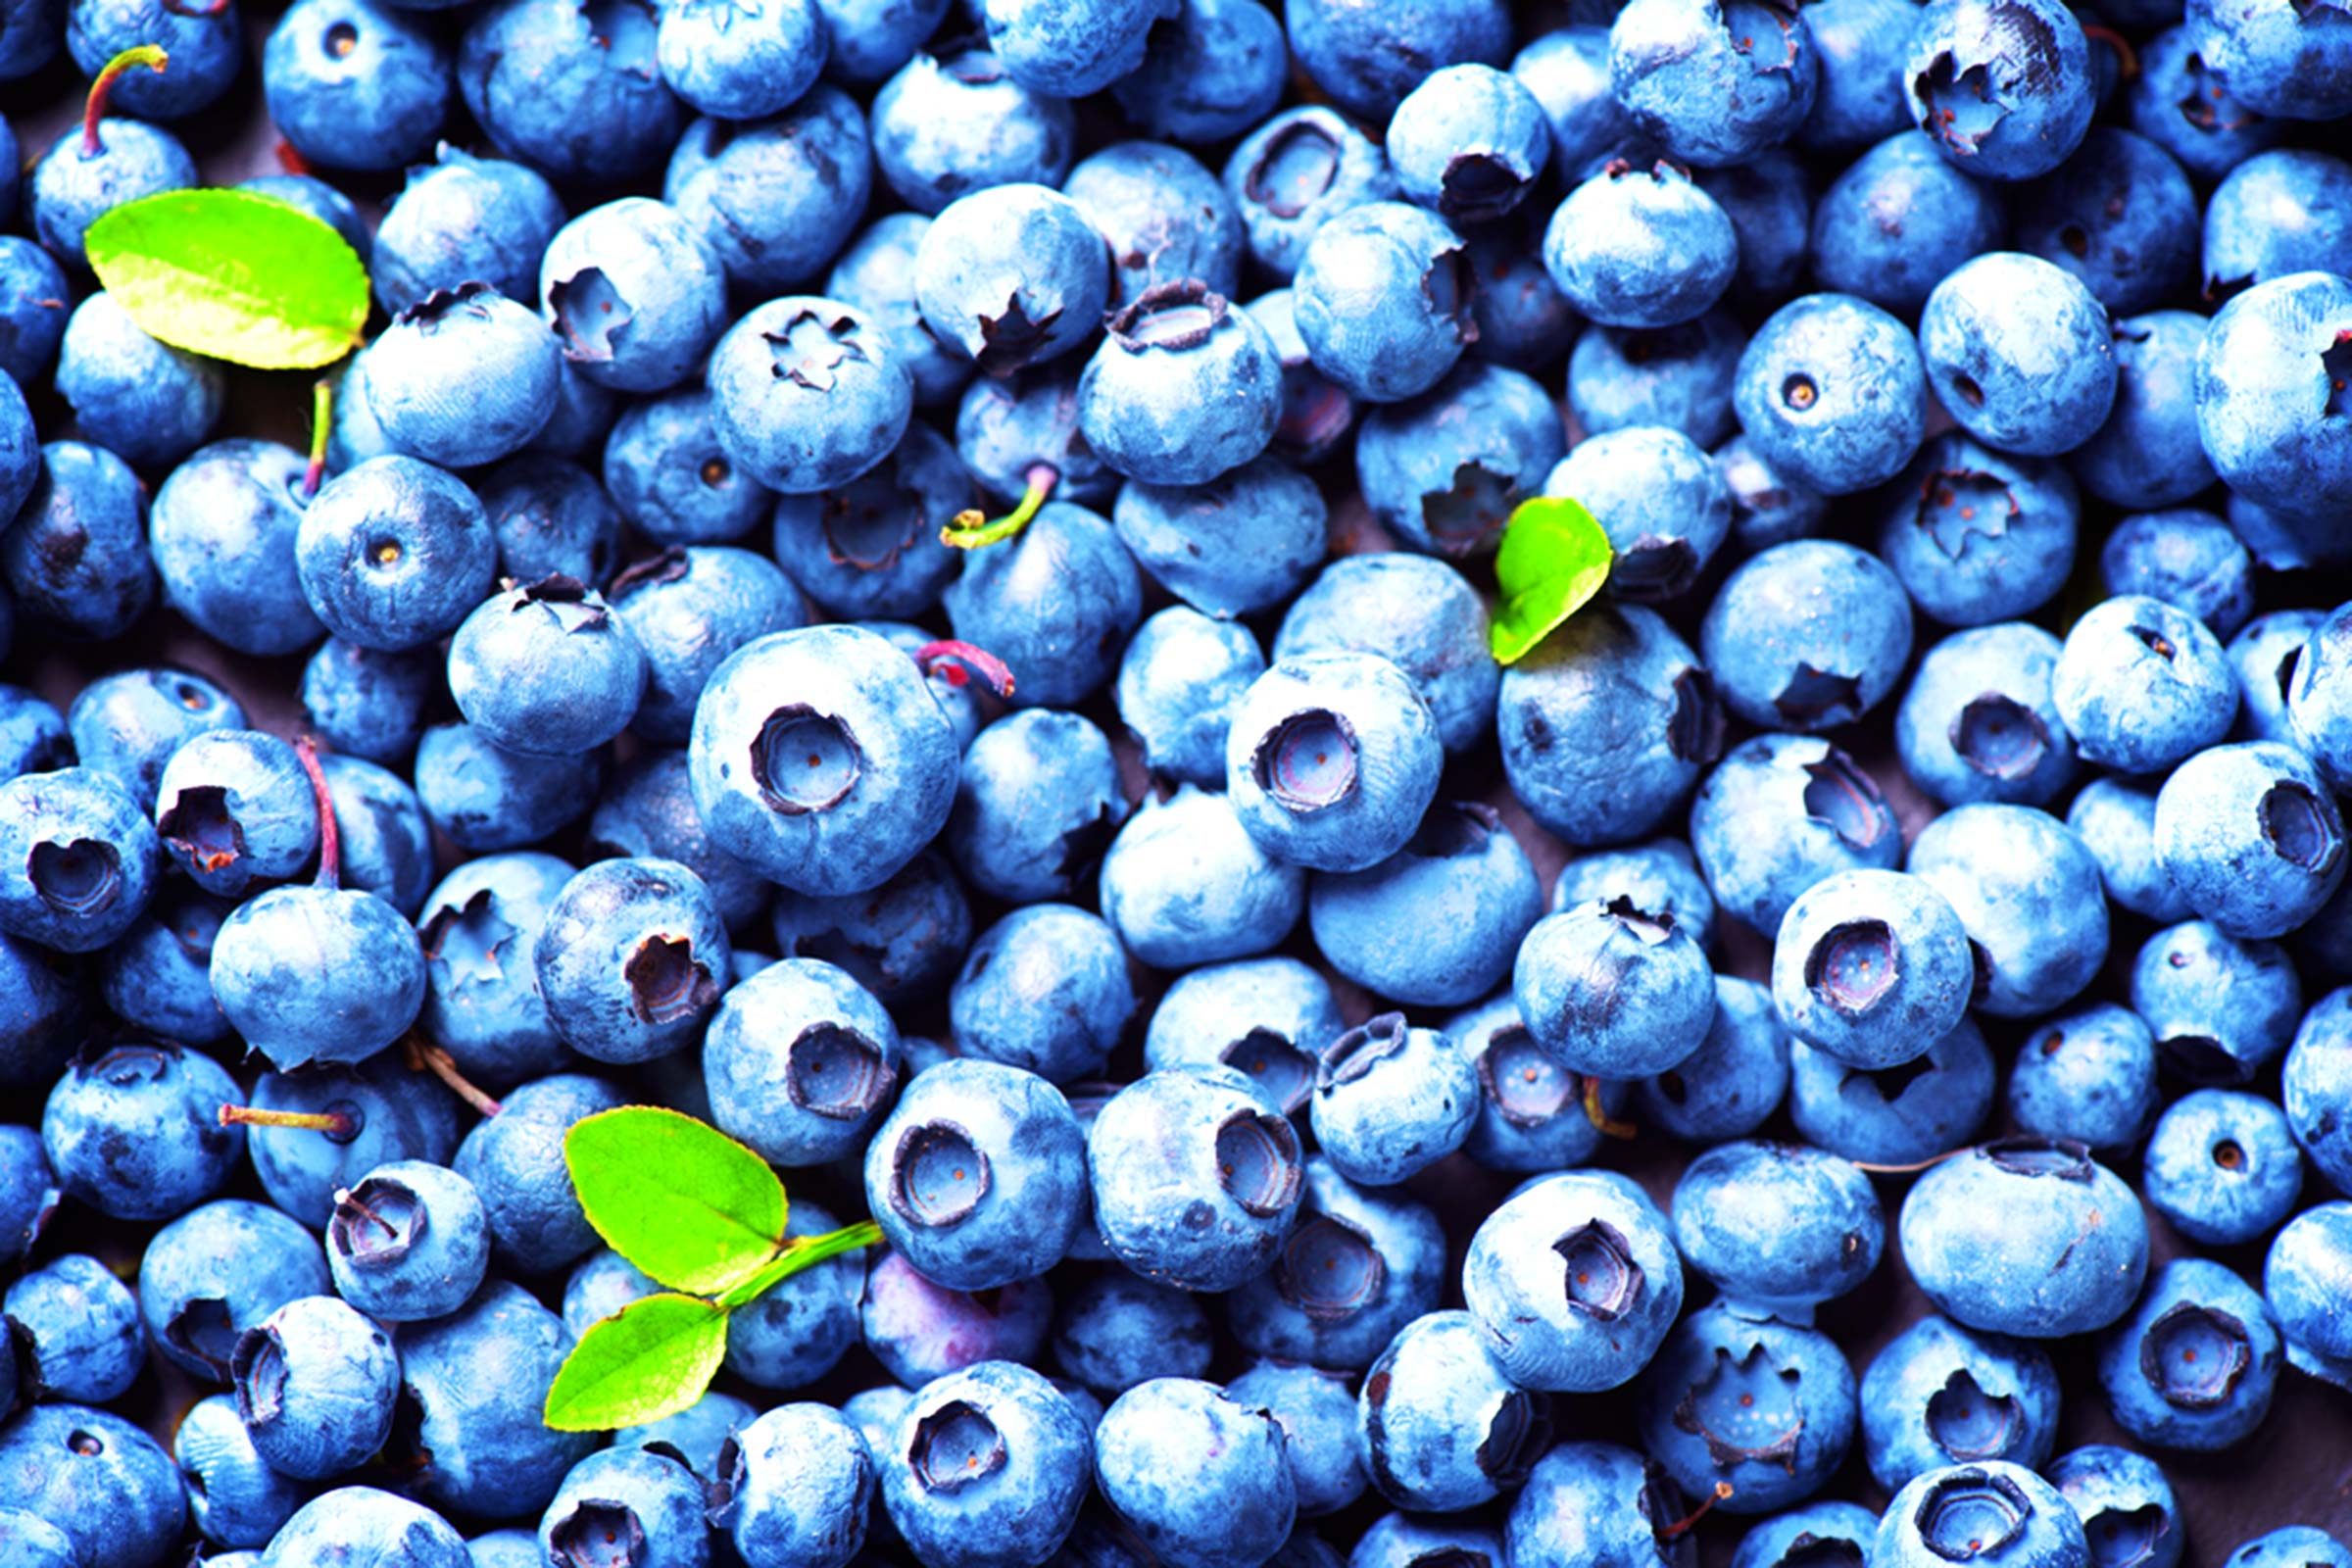 https://www.thehealthy.com/wp-content/uploads/2017/03/06-blueberries-Healthiest-Foods-From-Every-Food-Group_300059567-Subbotina-Anna.jpg?fit=696%2C464